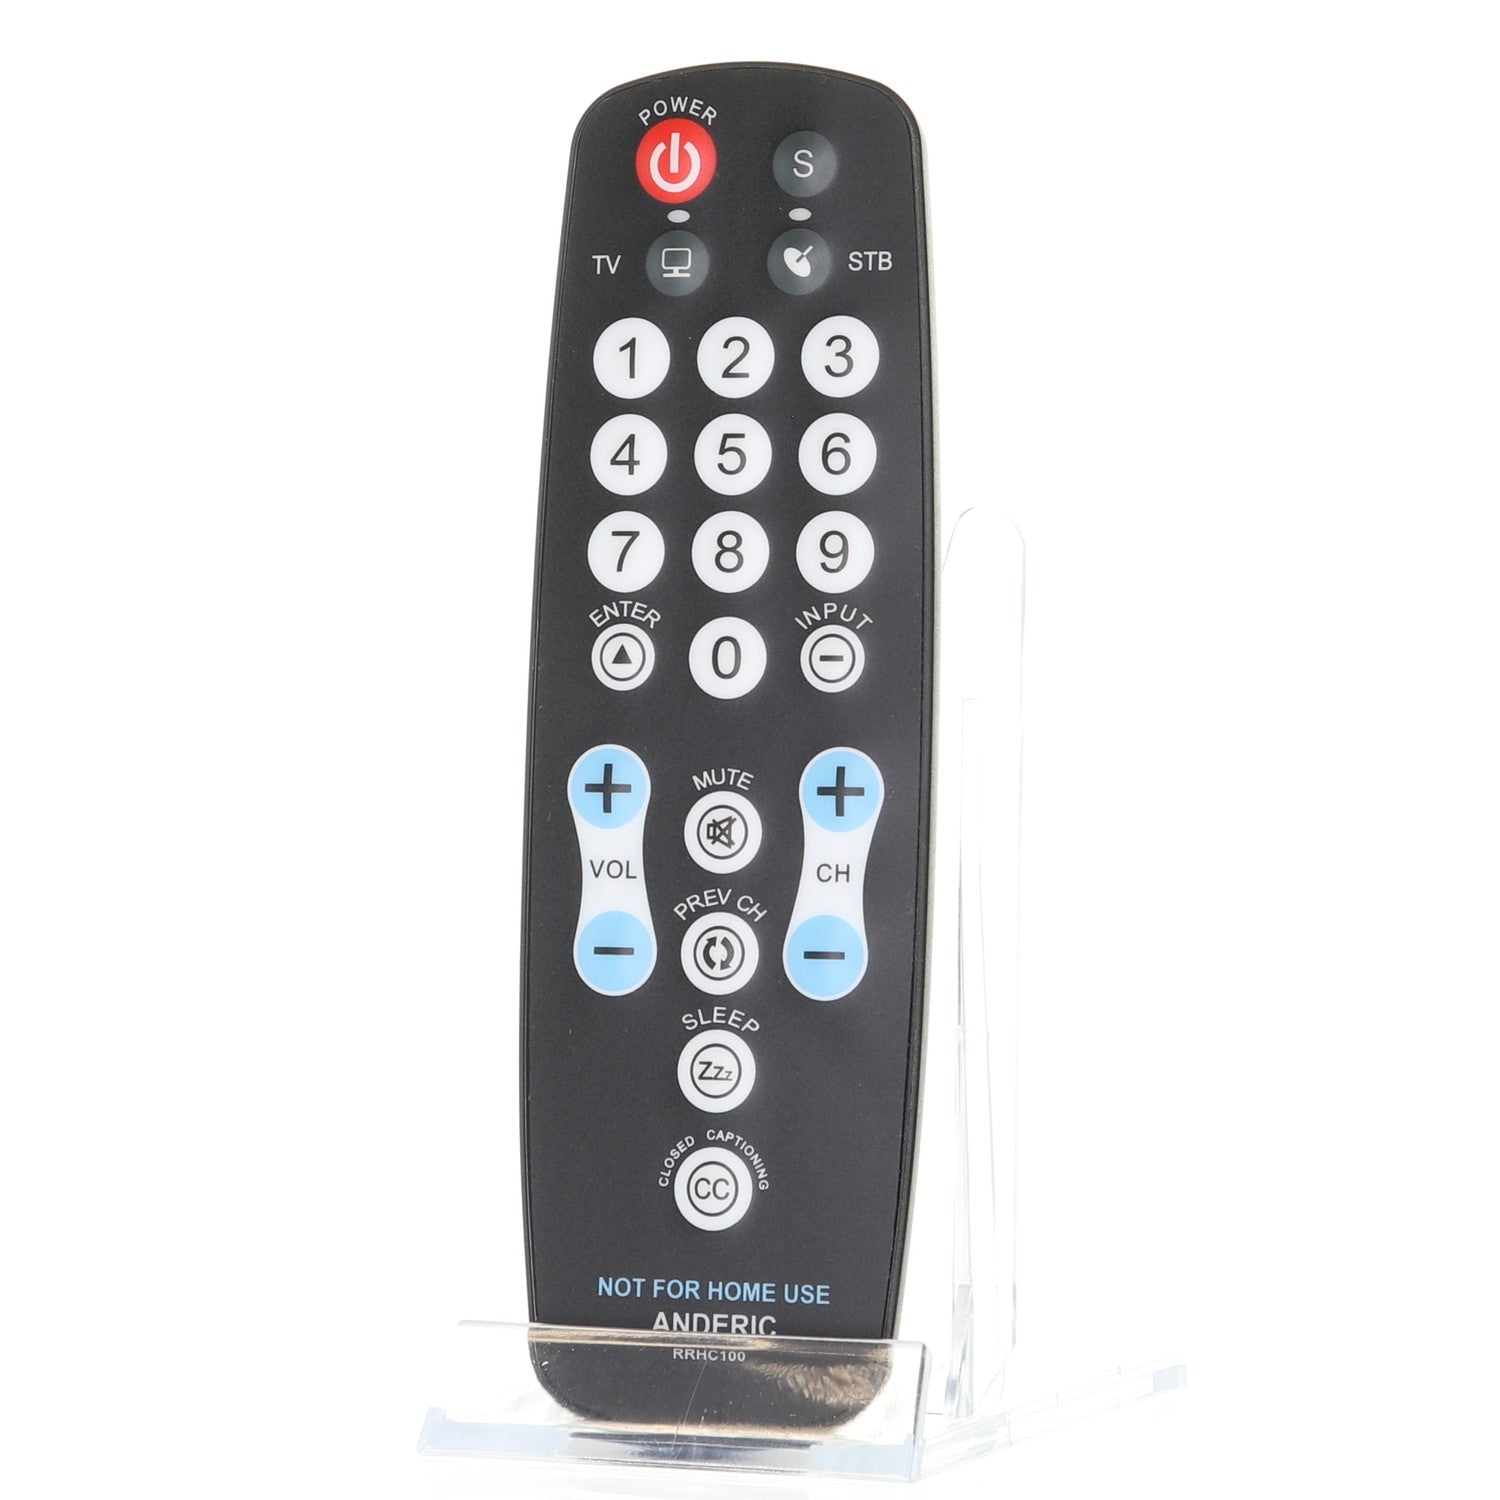 RRHC100 EzWipe 1-Device Universal Remote Control for Hospitality TVs + (optional) Set top boxes